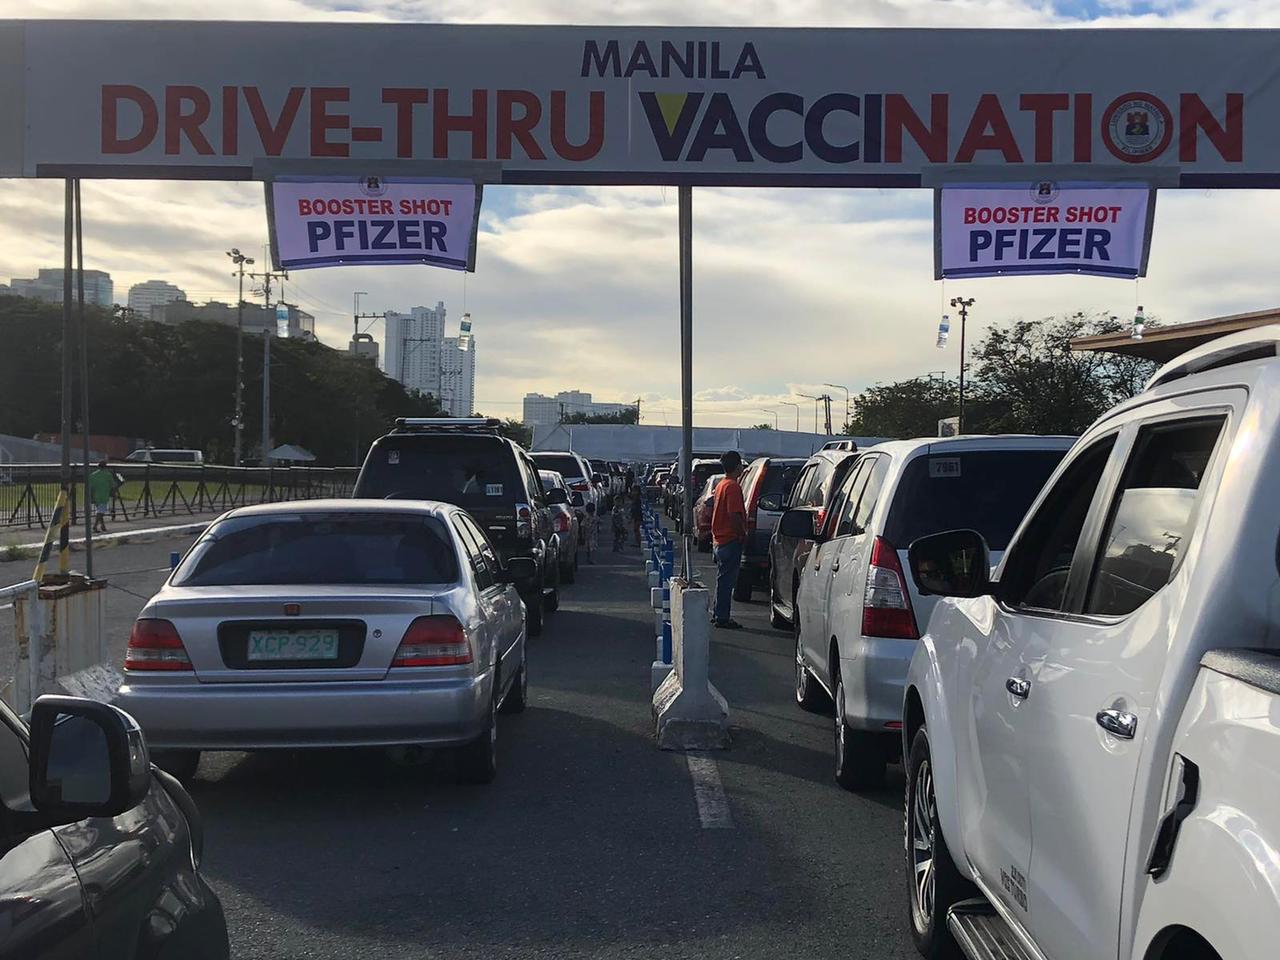 Four out of five Filipinos vaccinated against COVID-19 said they would get a booster shot, according to the latest Social Weather Stations (SWS) survey, which found that willingness to get a booster shot was high across geographic areas and educational levels.